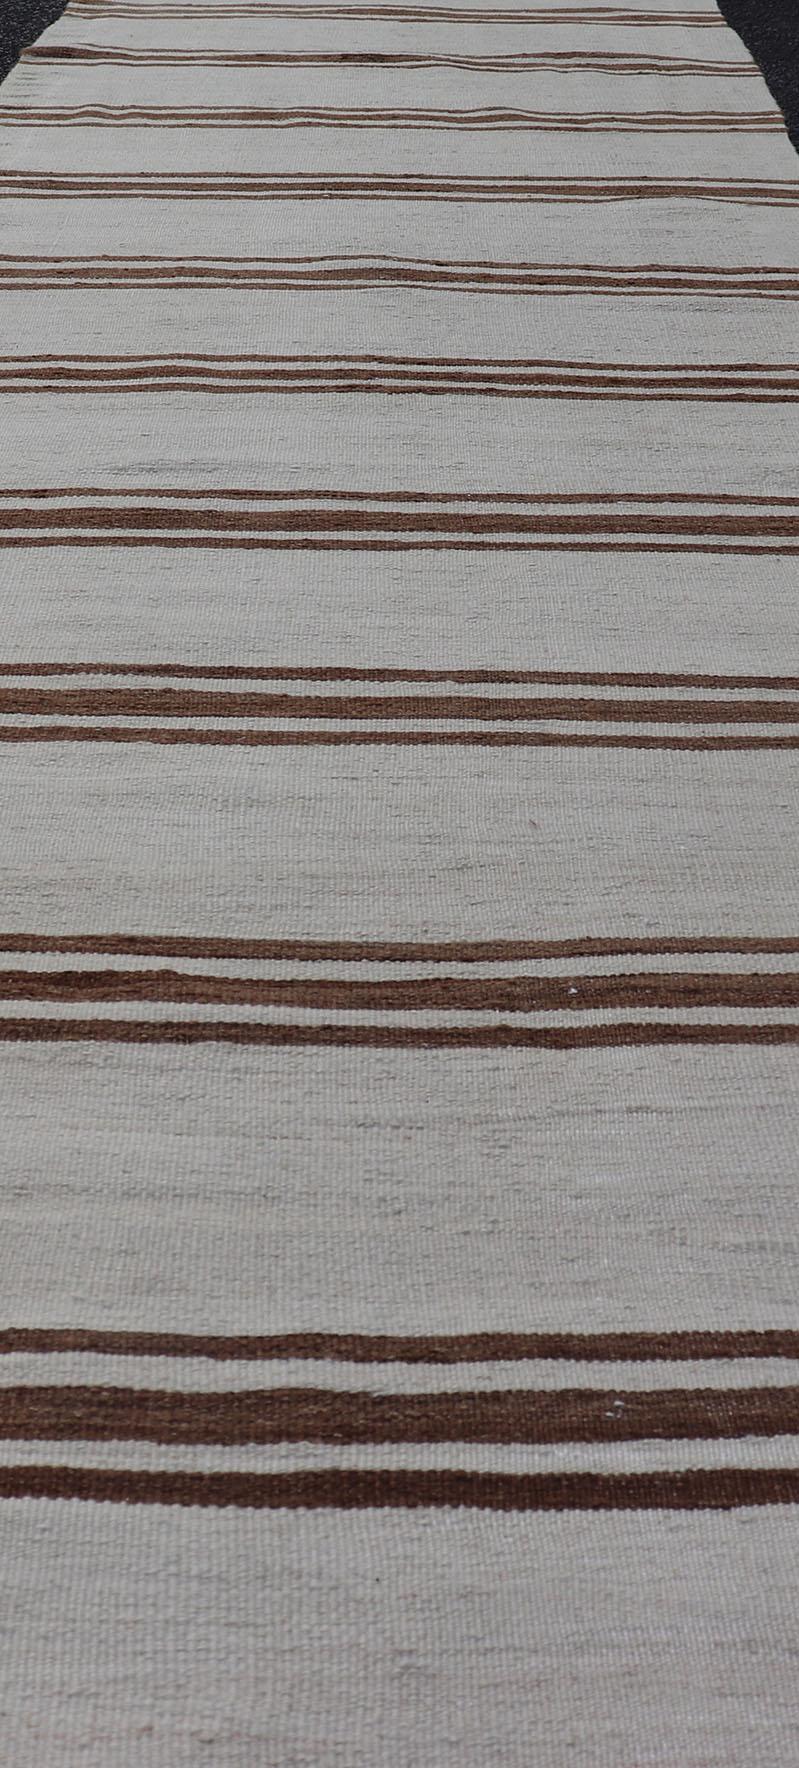 Long Vintage Turkish Natural Kilim with Stripes in Ivory, Taupe and Brown In Good Condition For Sale In Atlanta, GA